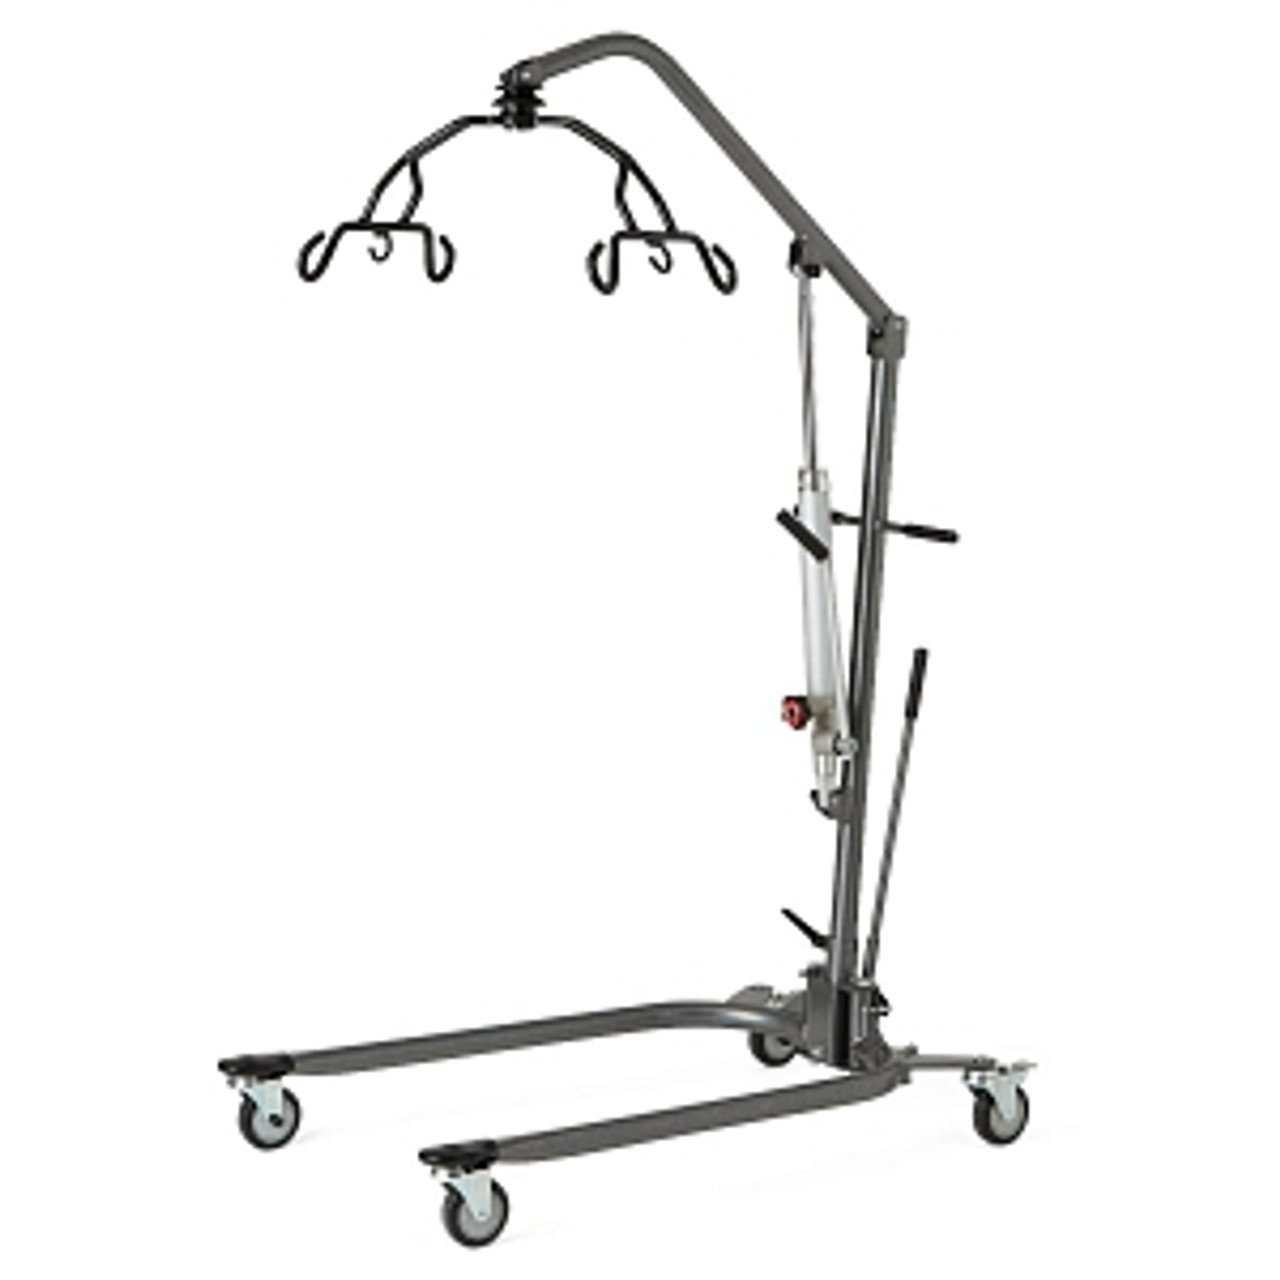 Elevating hydraulic lift for patient transportation
Base opens with an easy hand lever
6-point cradle type